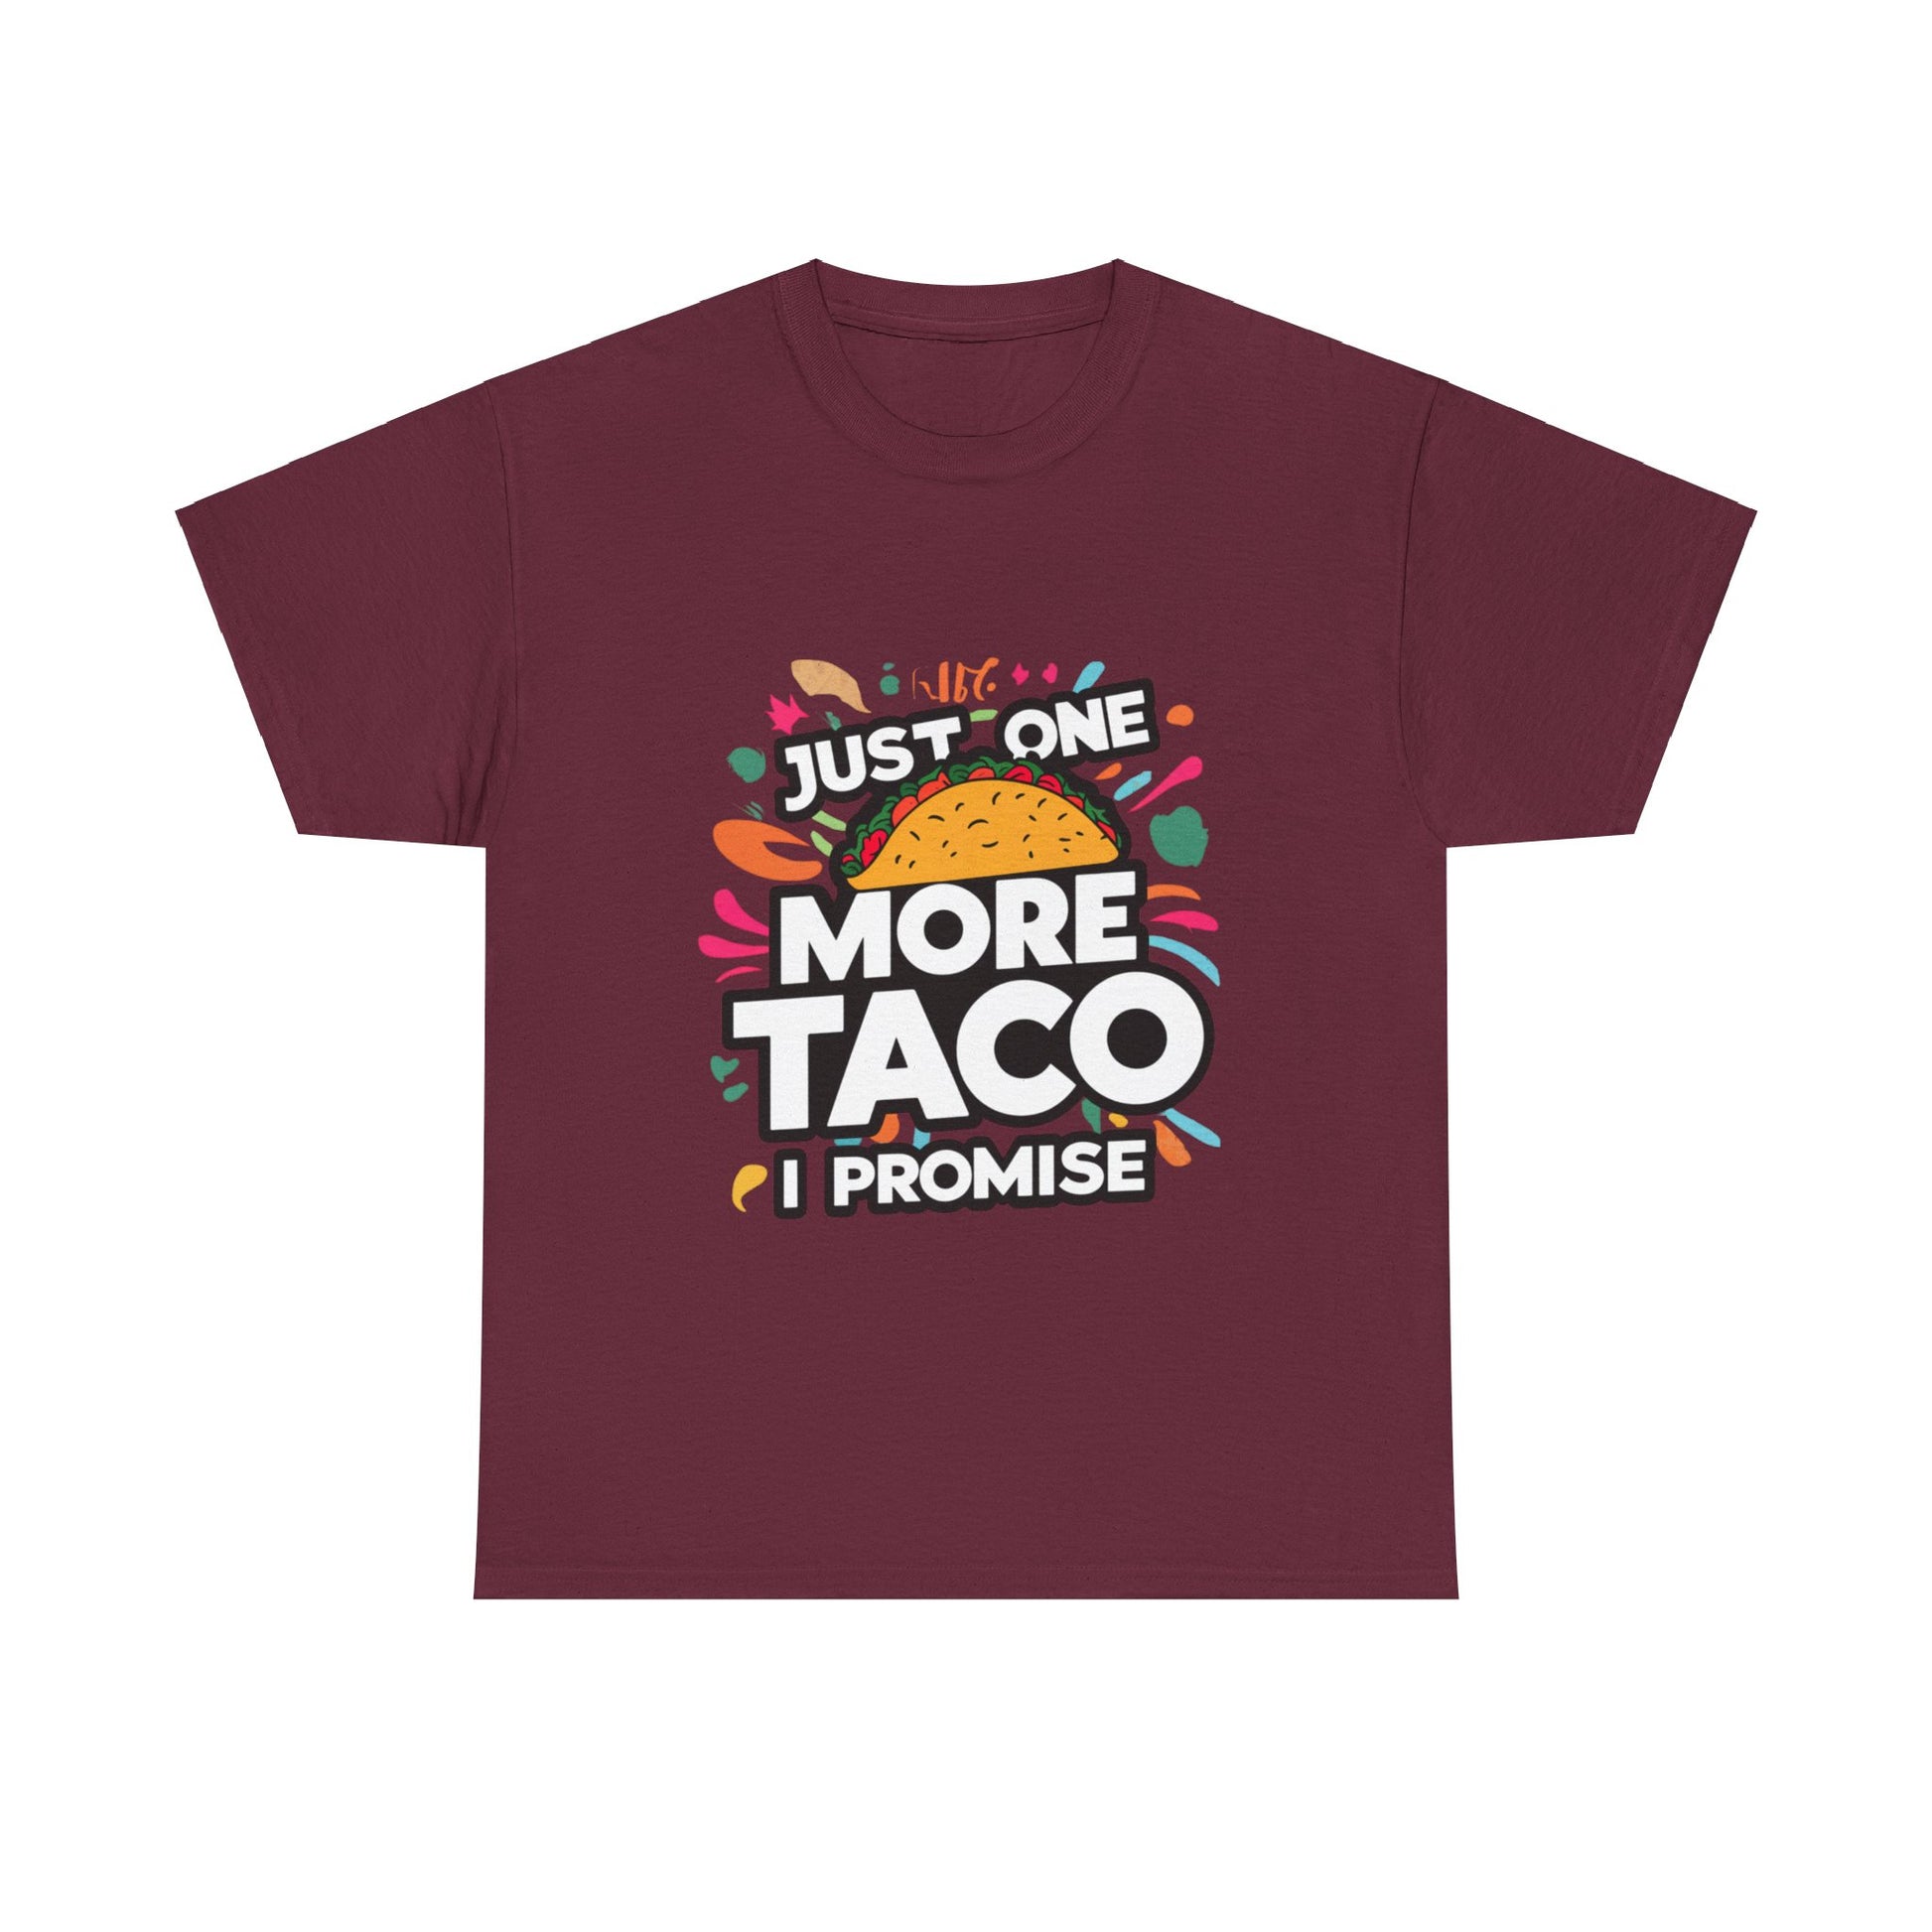 Just One More Taco I Promise Mexican Food Graphic Unisex Heavy Cotton Tee Cotton Funny Humorous Graphic Soft Premium Unisex Men Women Maroon T-shirt Birthday Gift-5